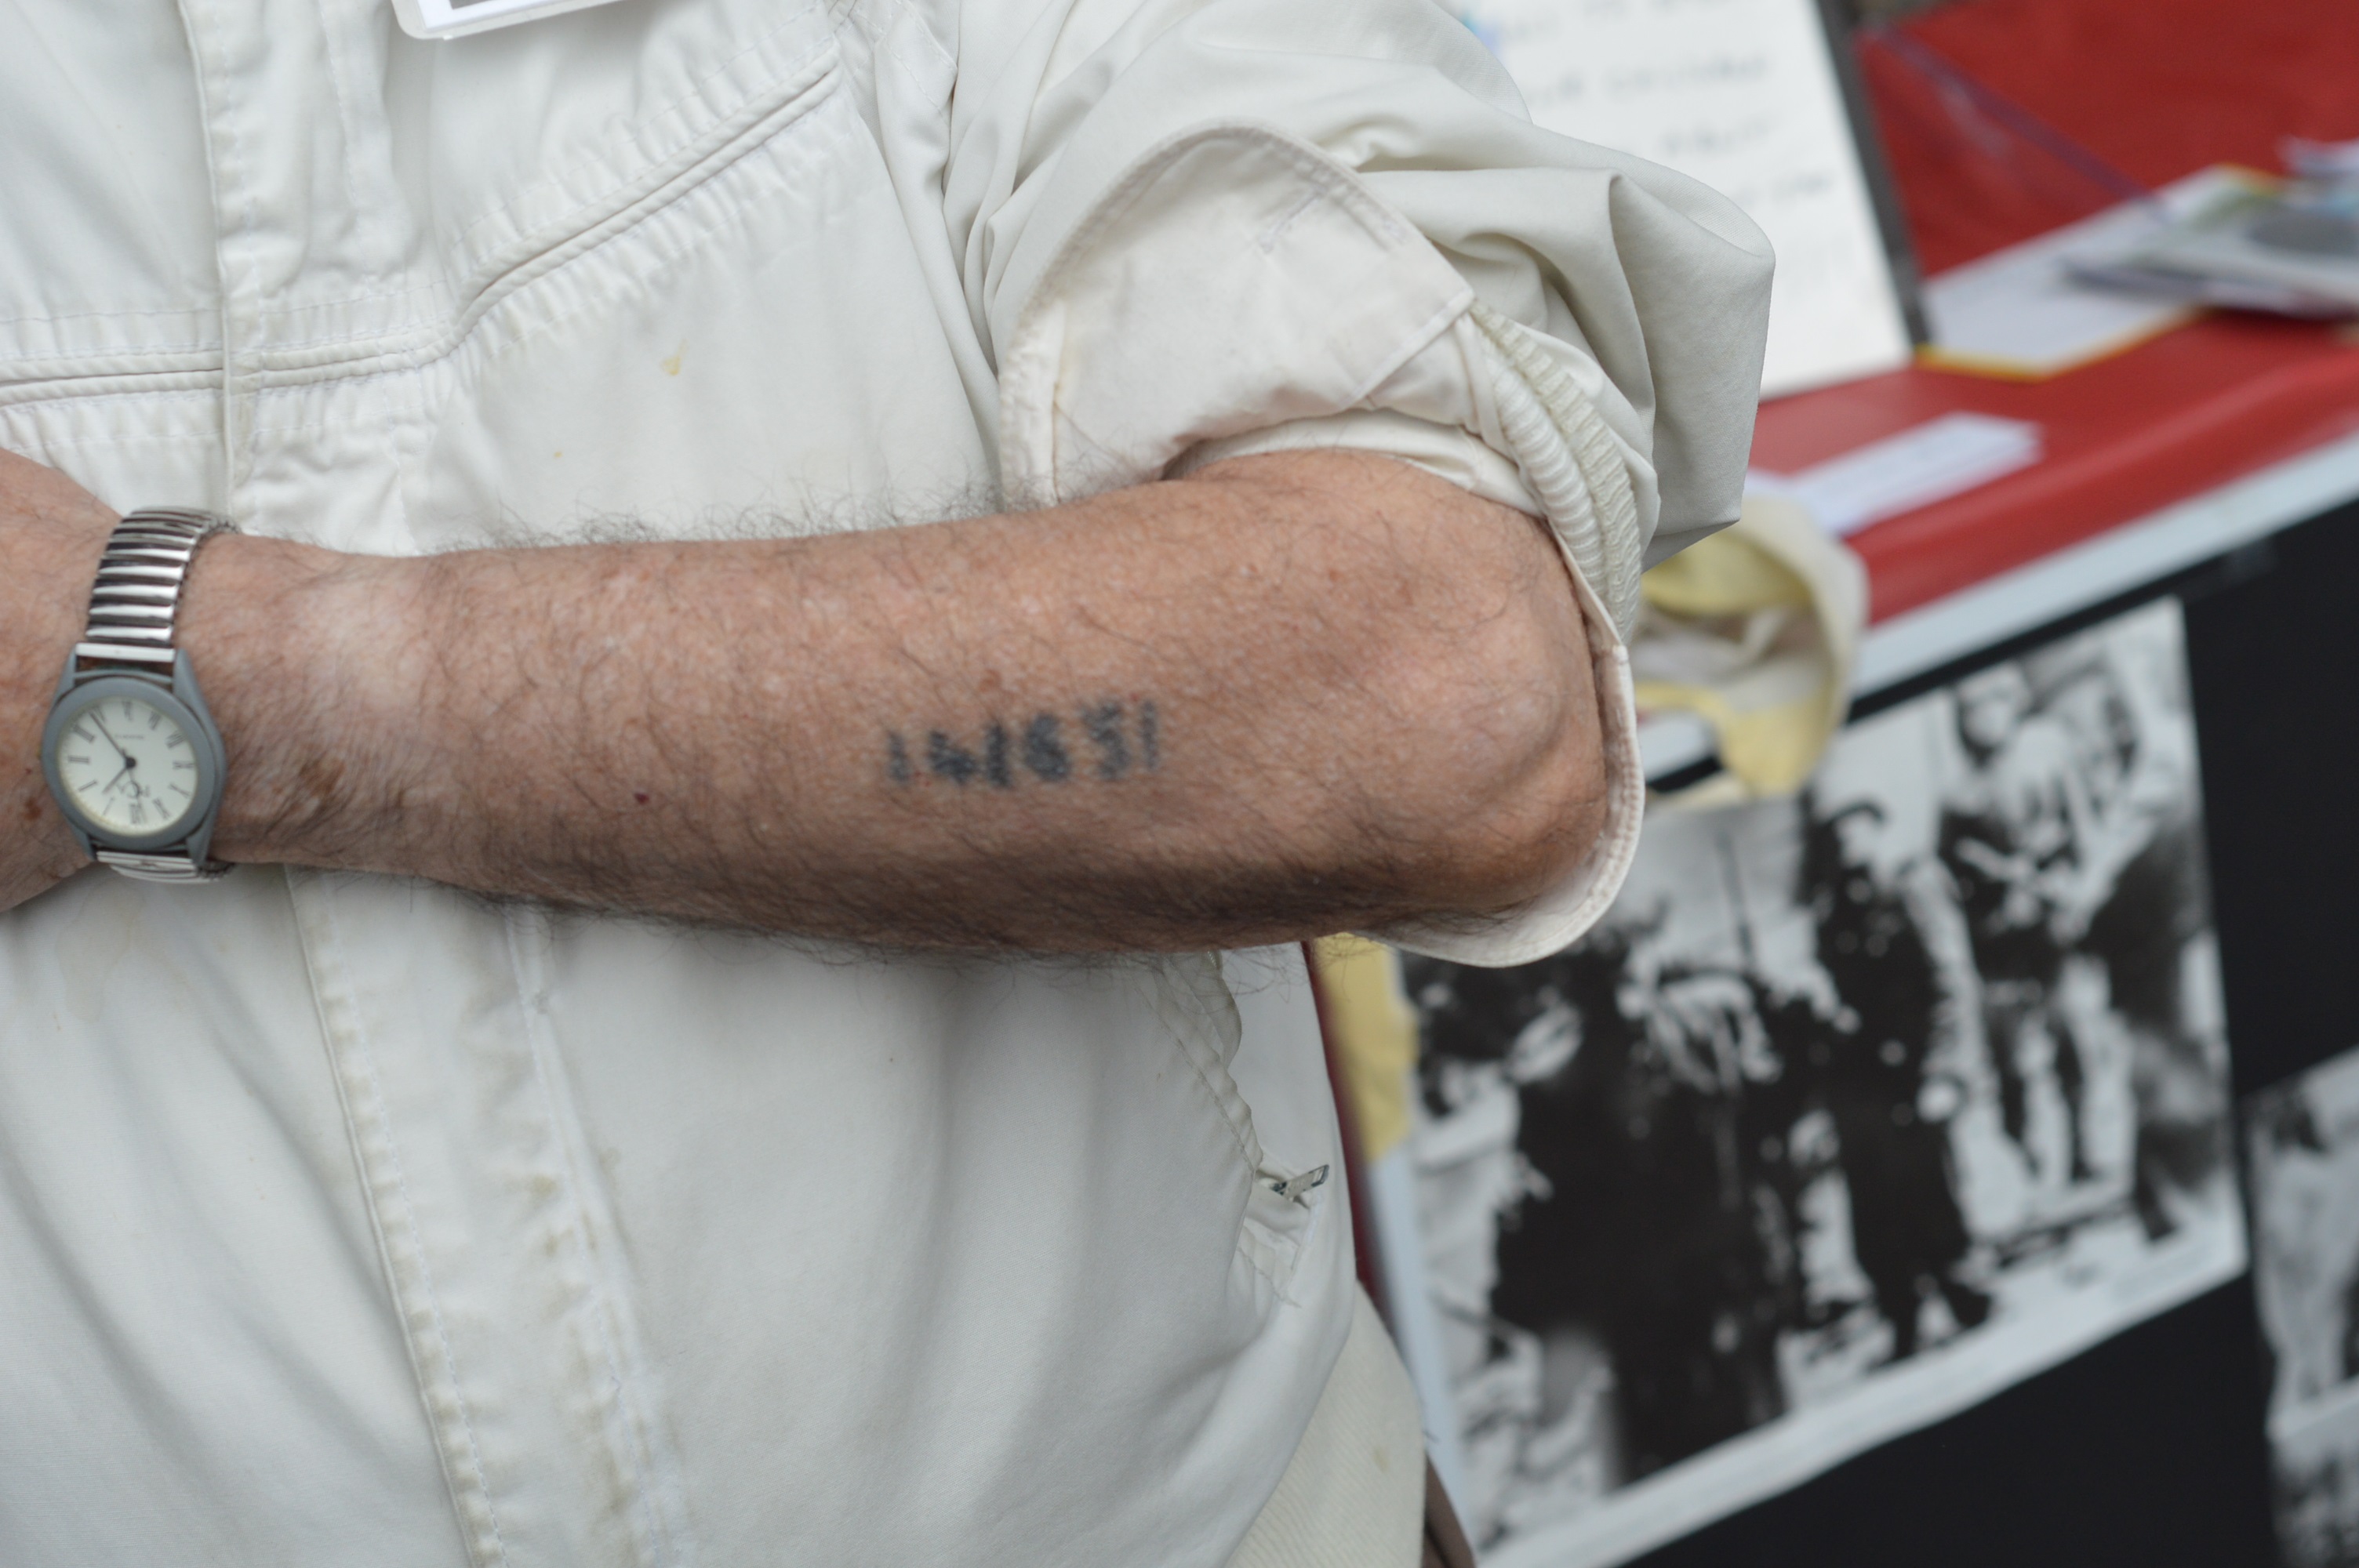 Holocaust survivor David Tuck shows the number tattooed on his arm by the Nazis (Anthony C. Hayes)